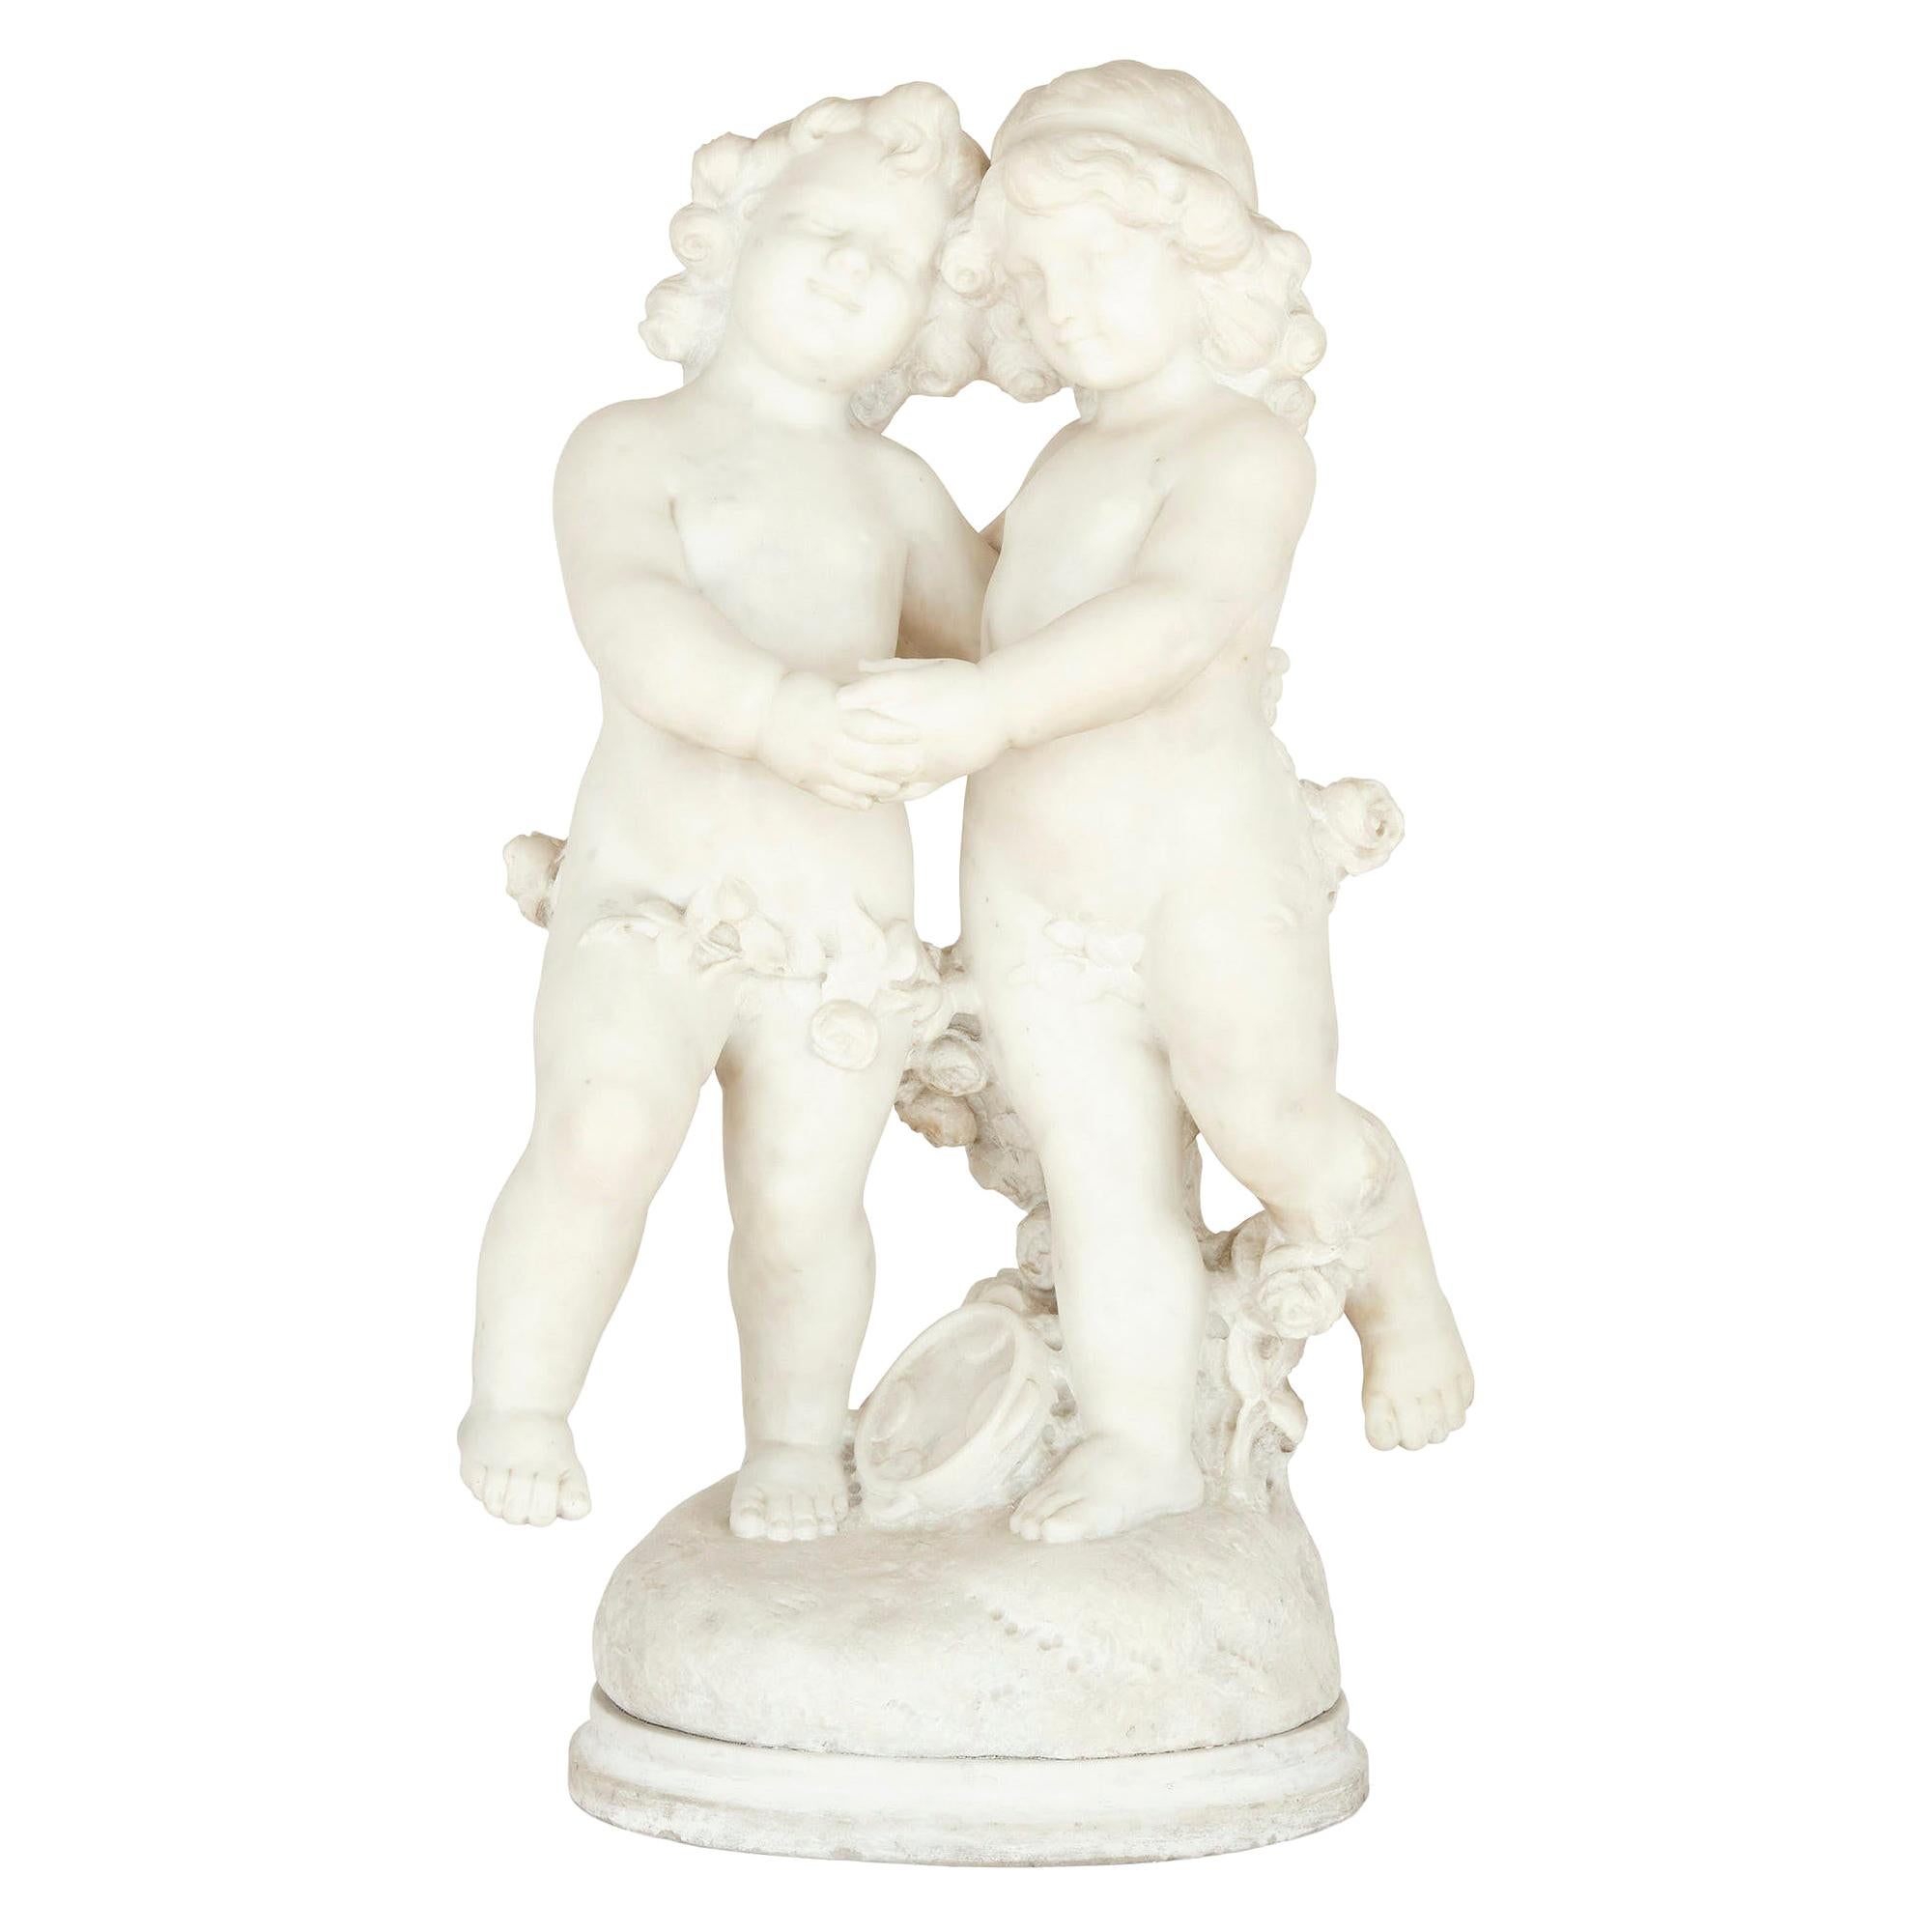 19th Century White Marble Group of Two Cherubs by A. Duché